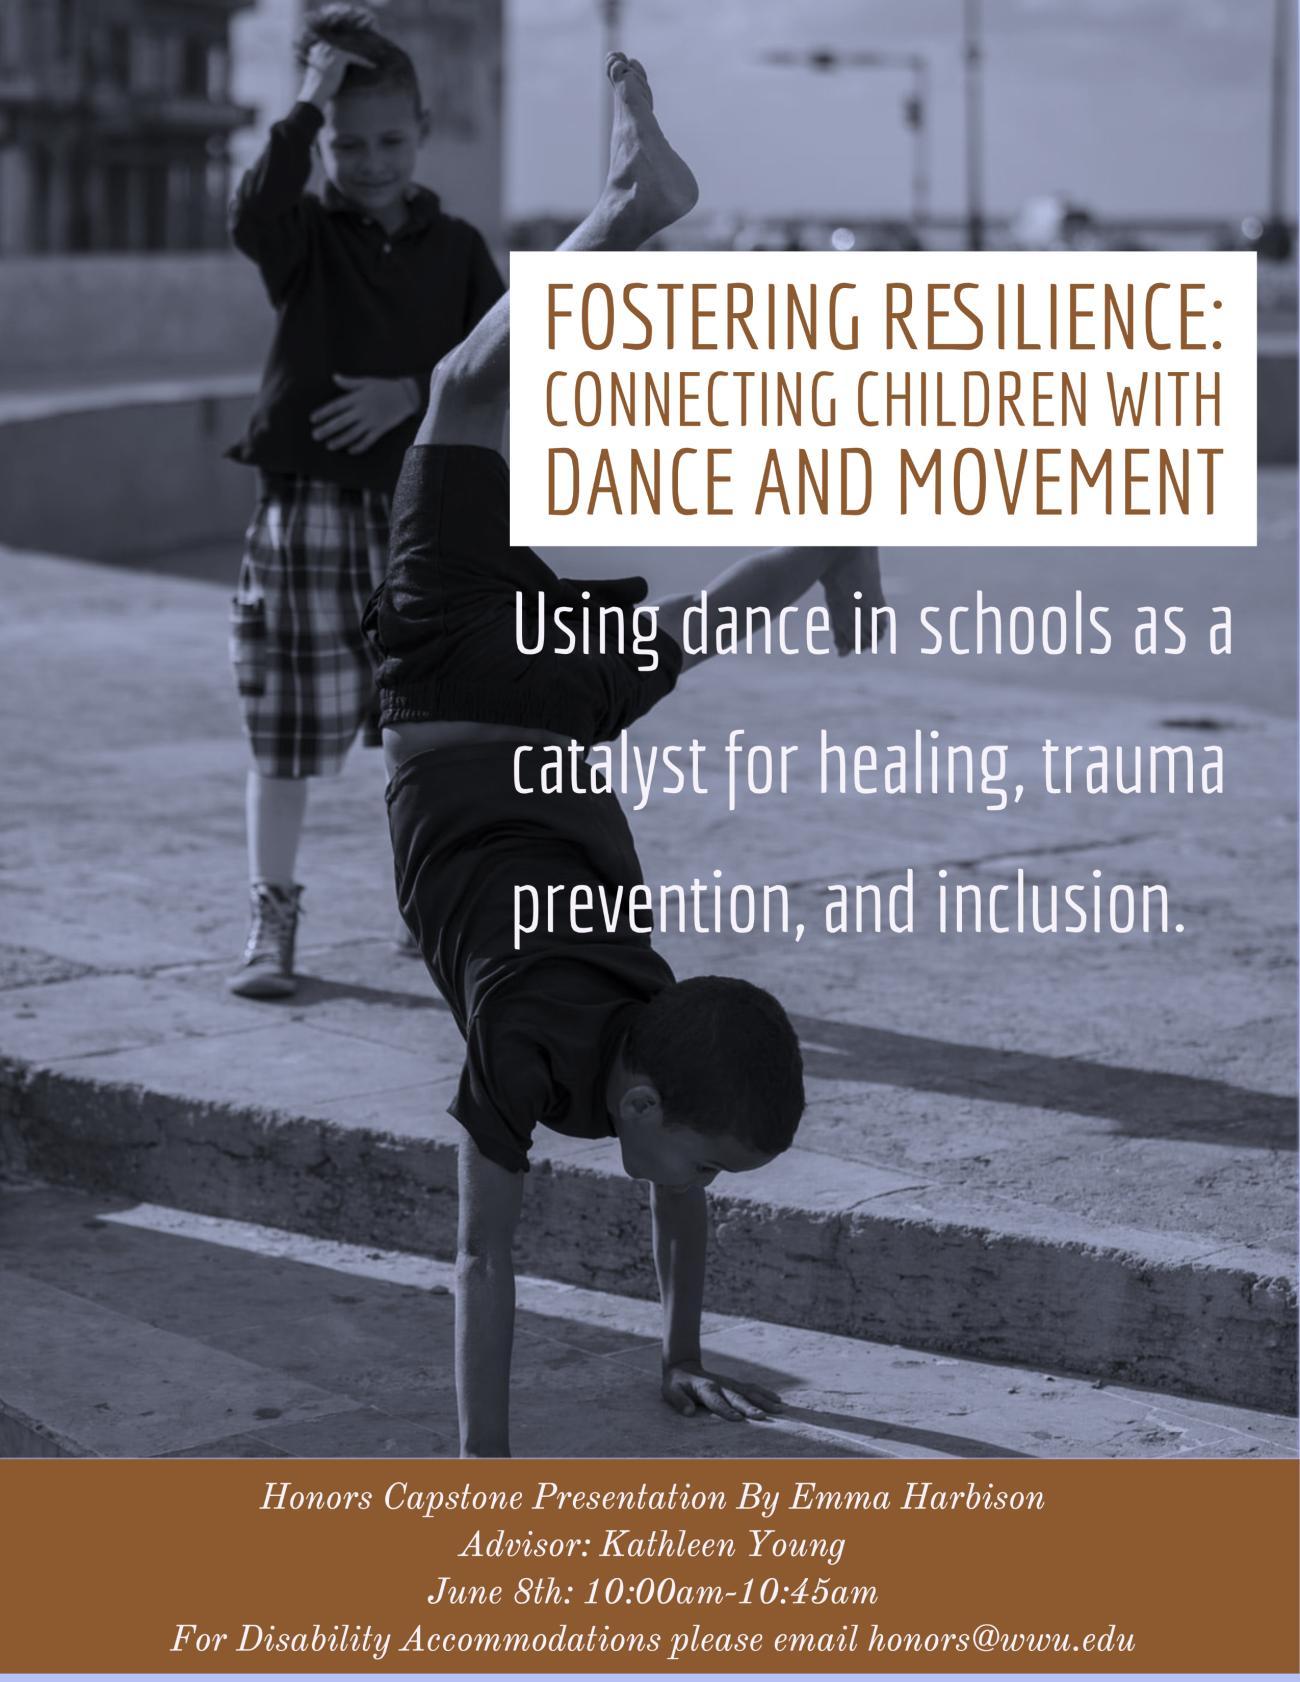 Fostering Resilience: Connecting Children with Dance and Movement